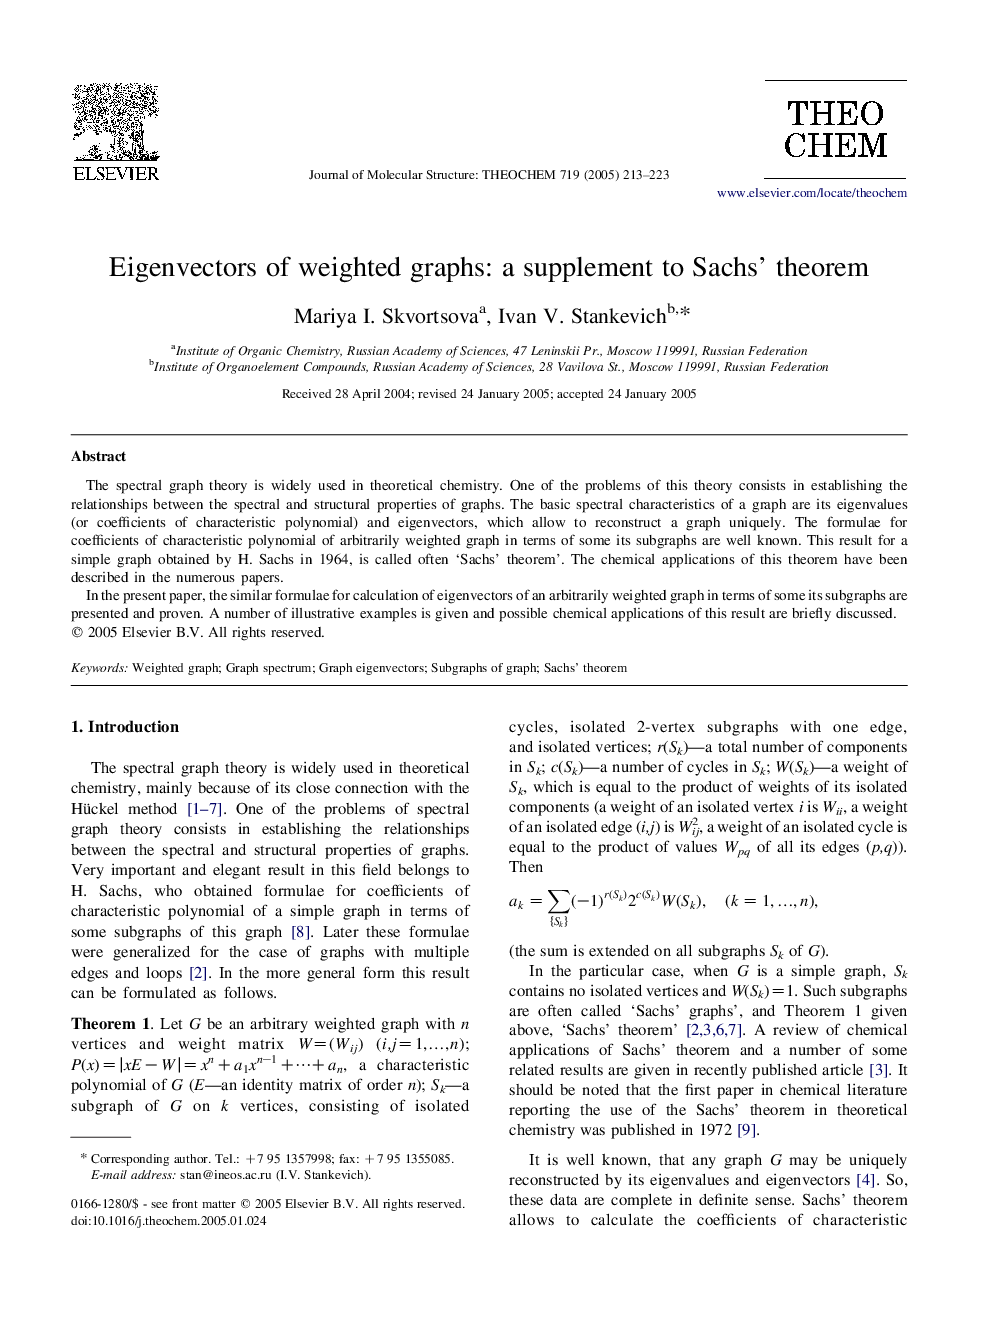 Eigenvectors of weighted graphs: a supplement to Sachs' theorem